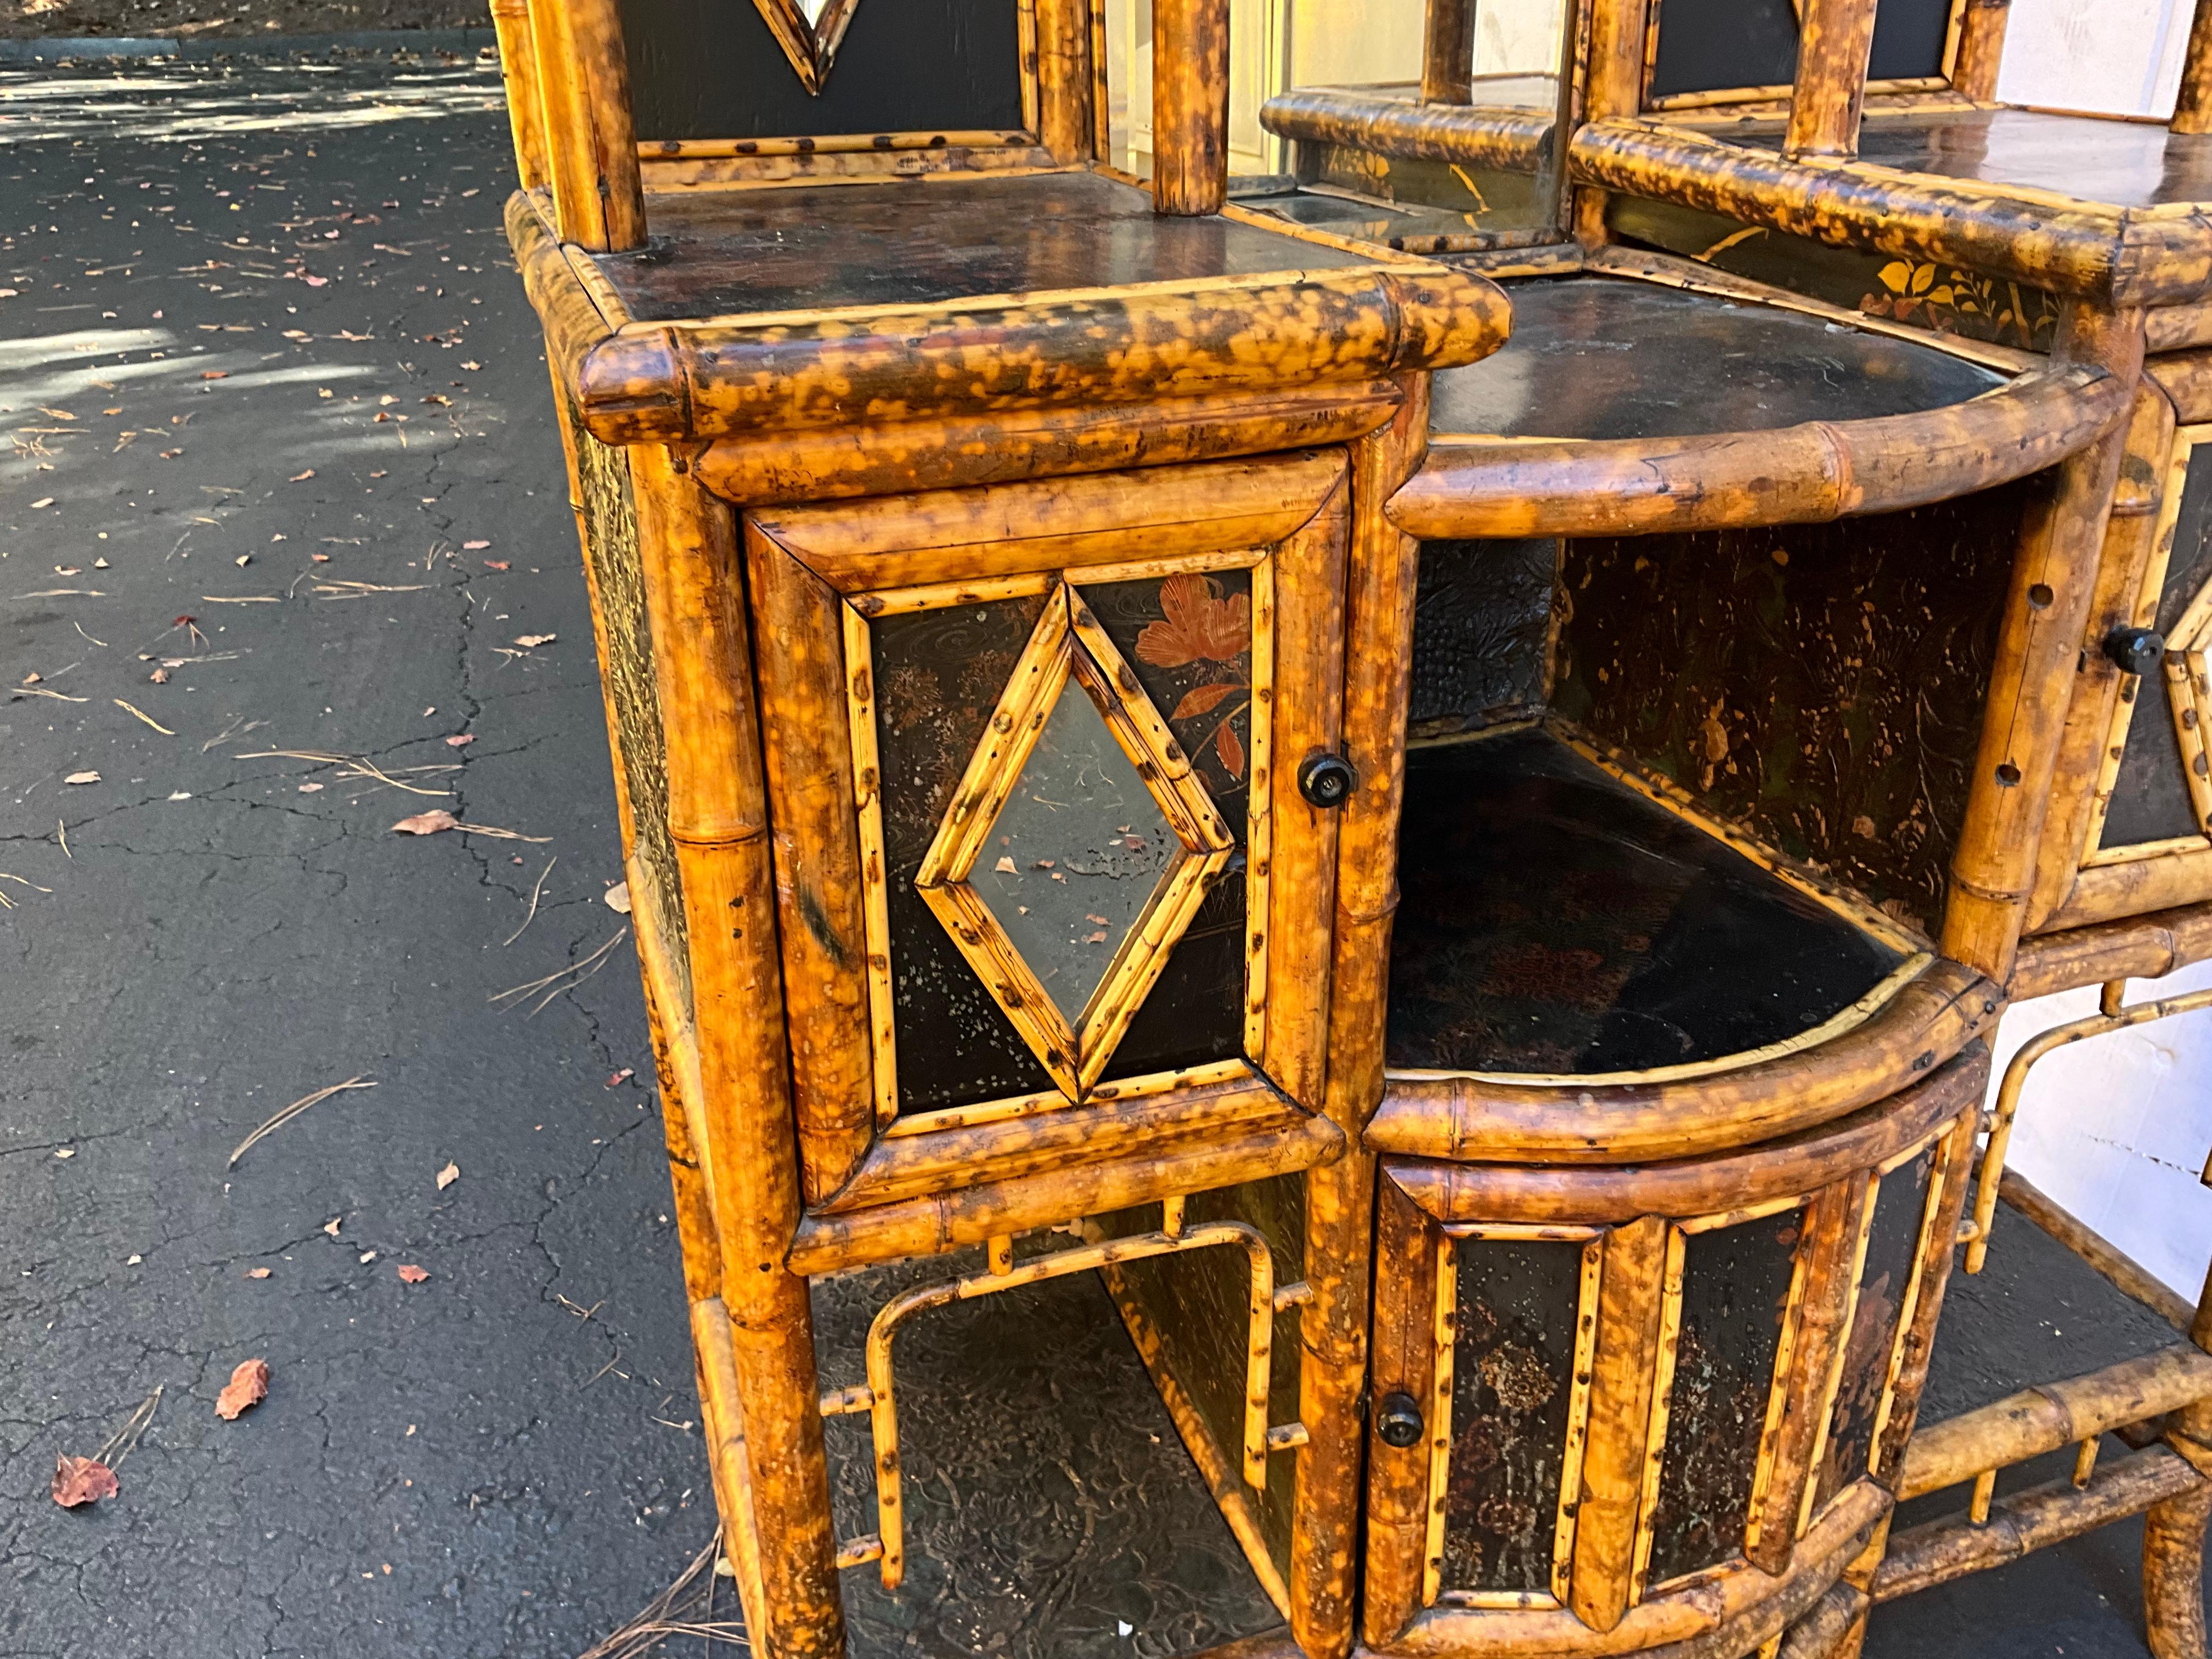 19th Century 19th-C. English Aesthetic Movement Bamboo & Lacquer Cabinet / Etagere / Vanity  For Sale